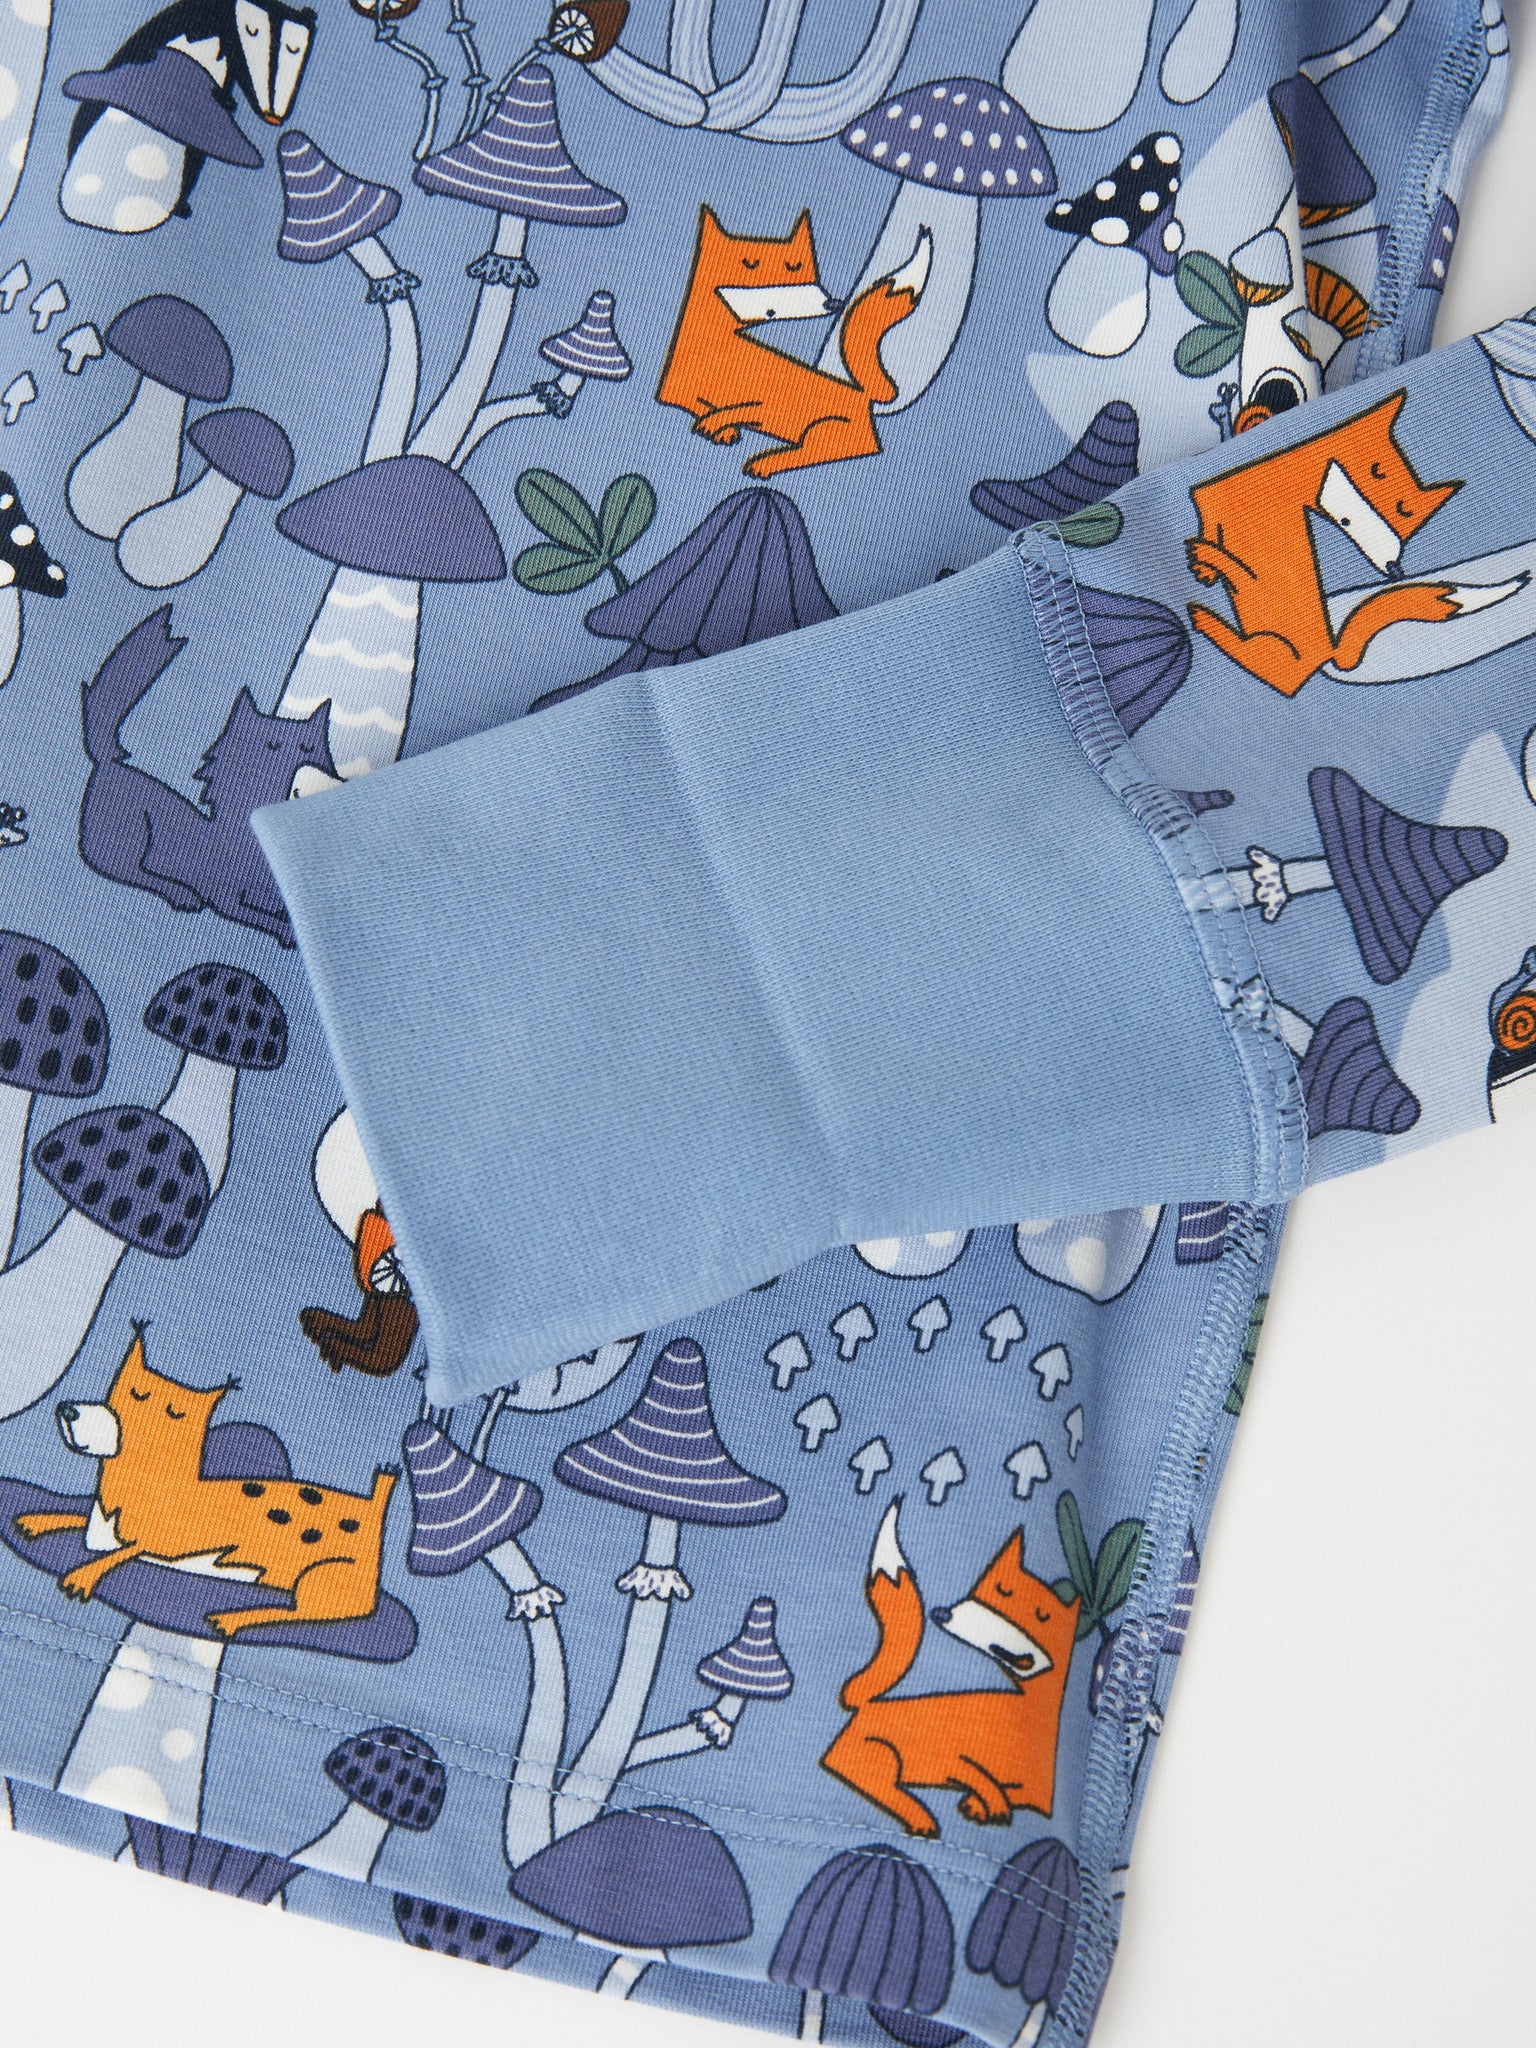 Nordic Forest Kids Blue Pyjamas from the Polarn O. Pyret kids collection. The best ethical kids clothes